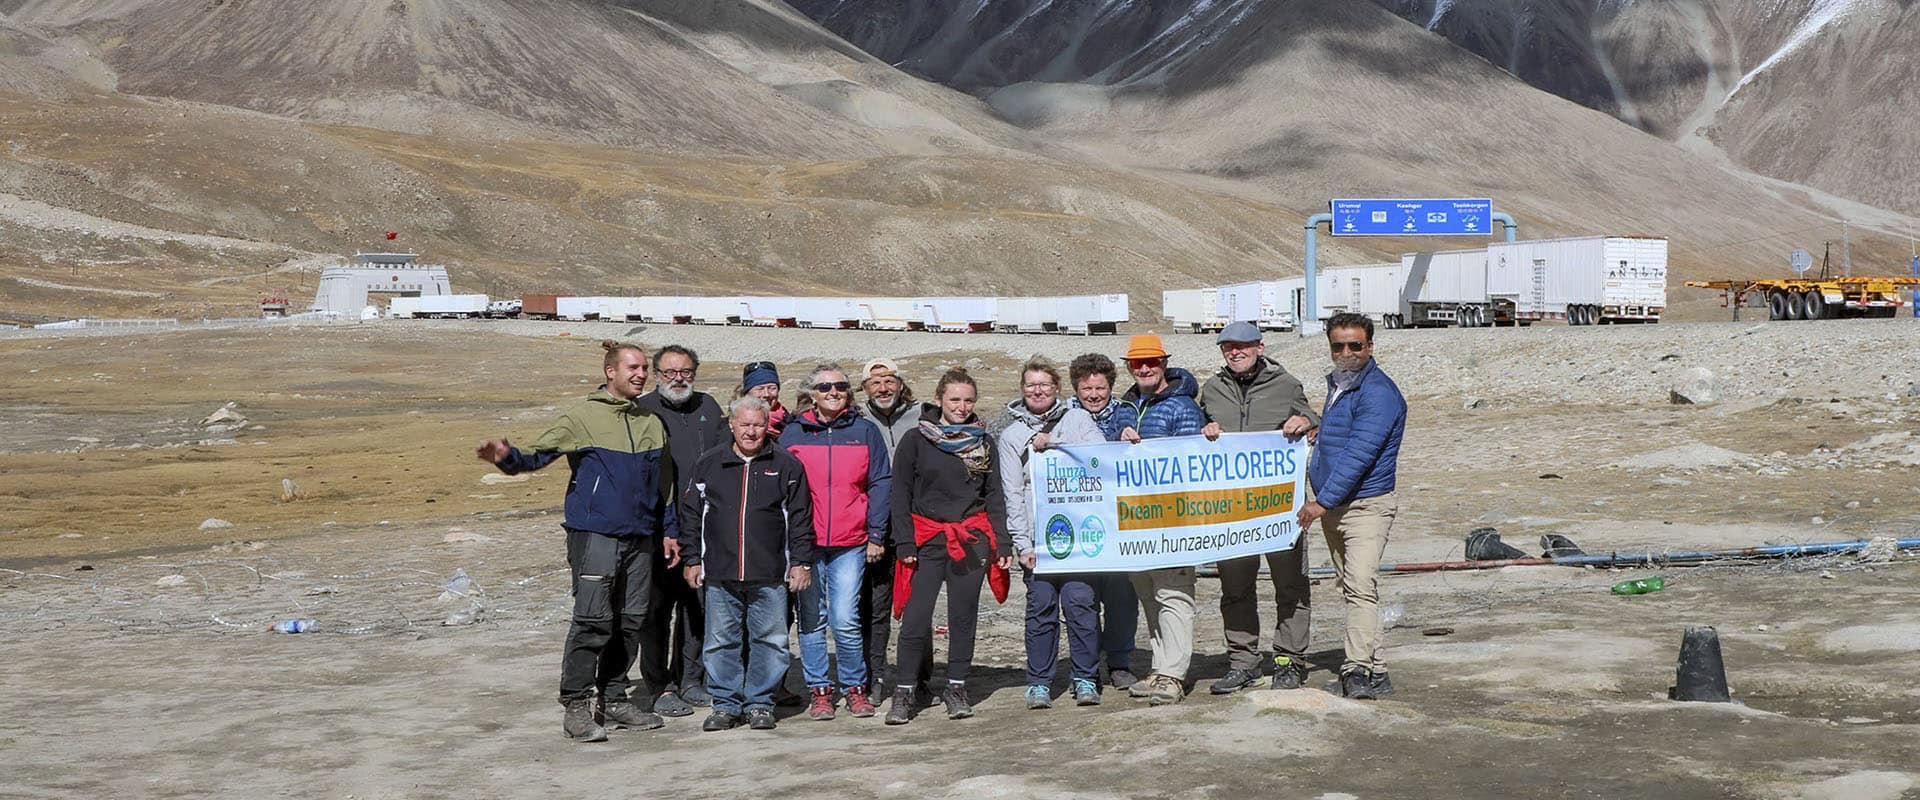 Day 12: Visit Khunjerab Pass - The Roof of the World